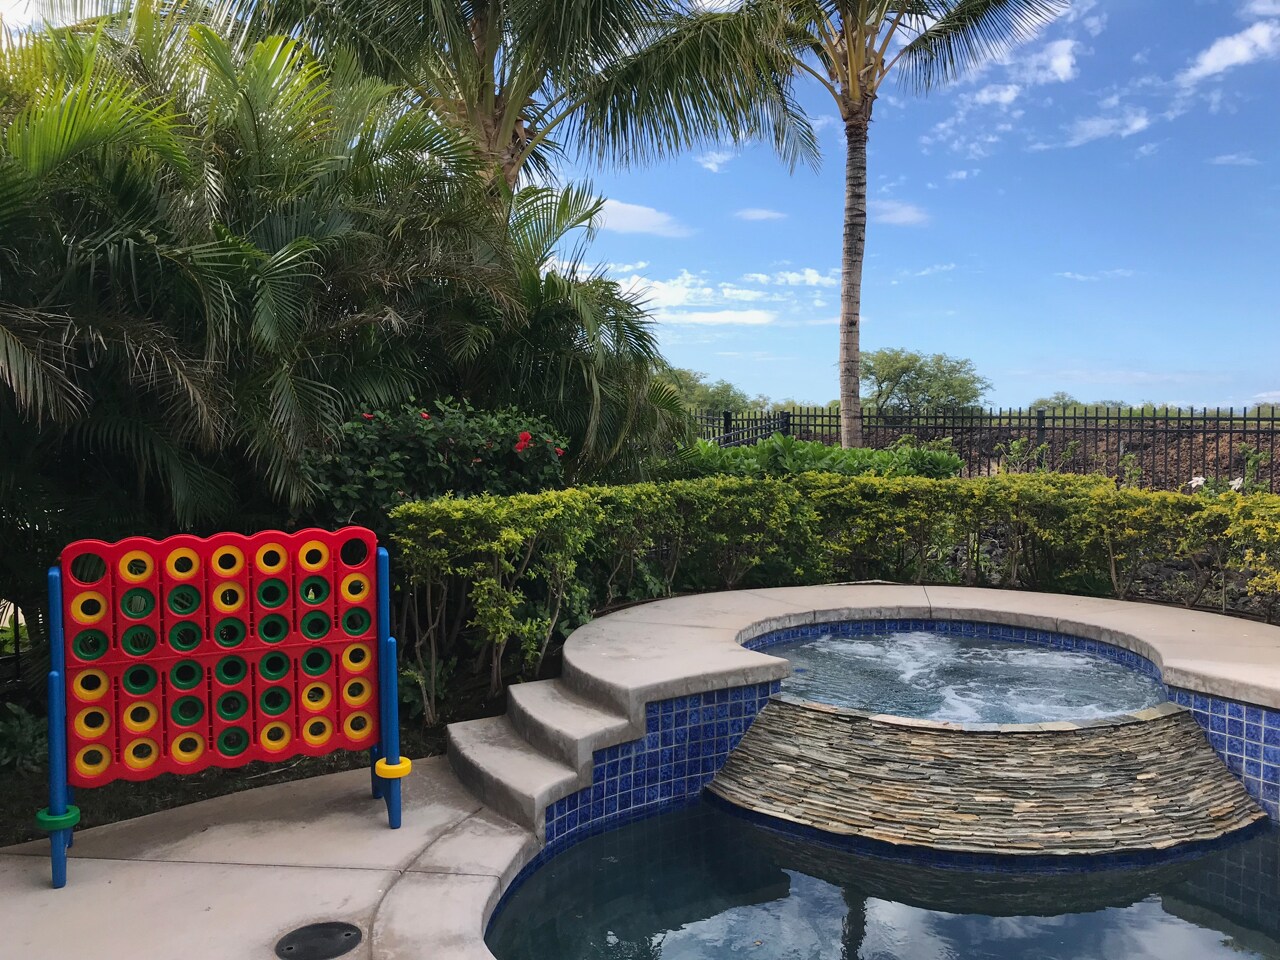 Play a BIG game of Connect 4 by the pool!